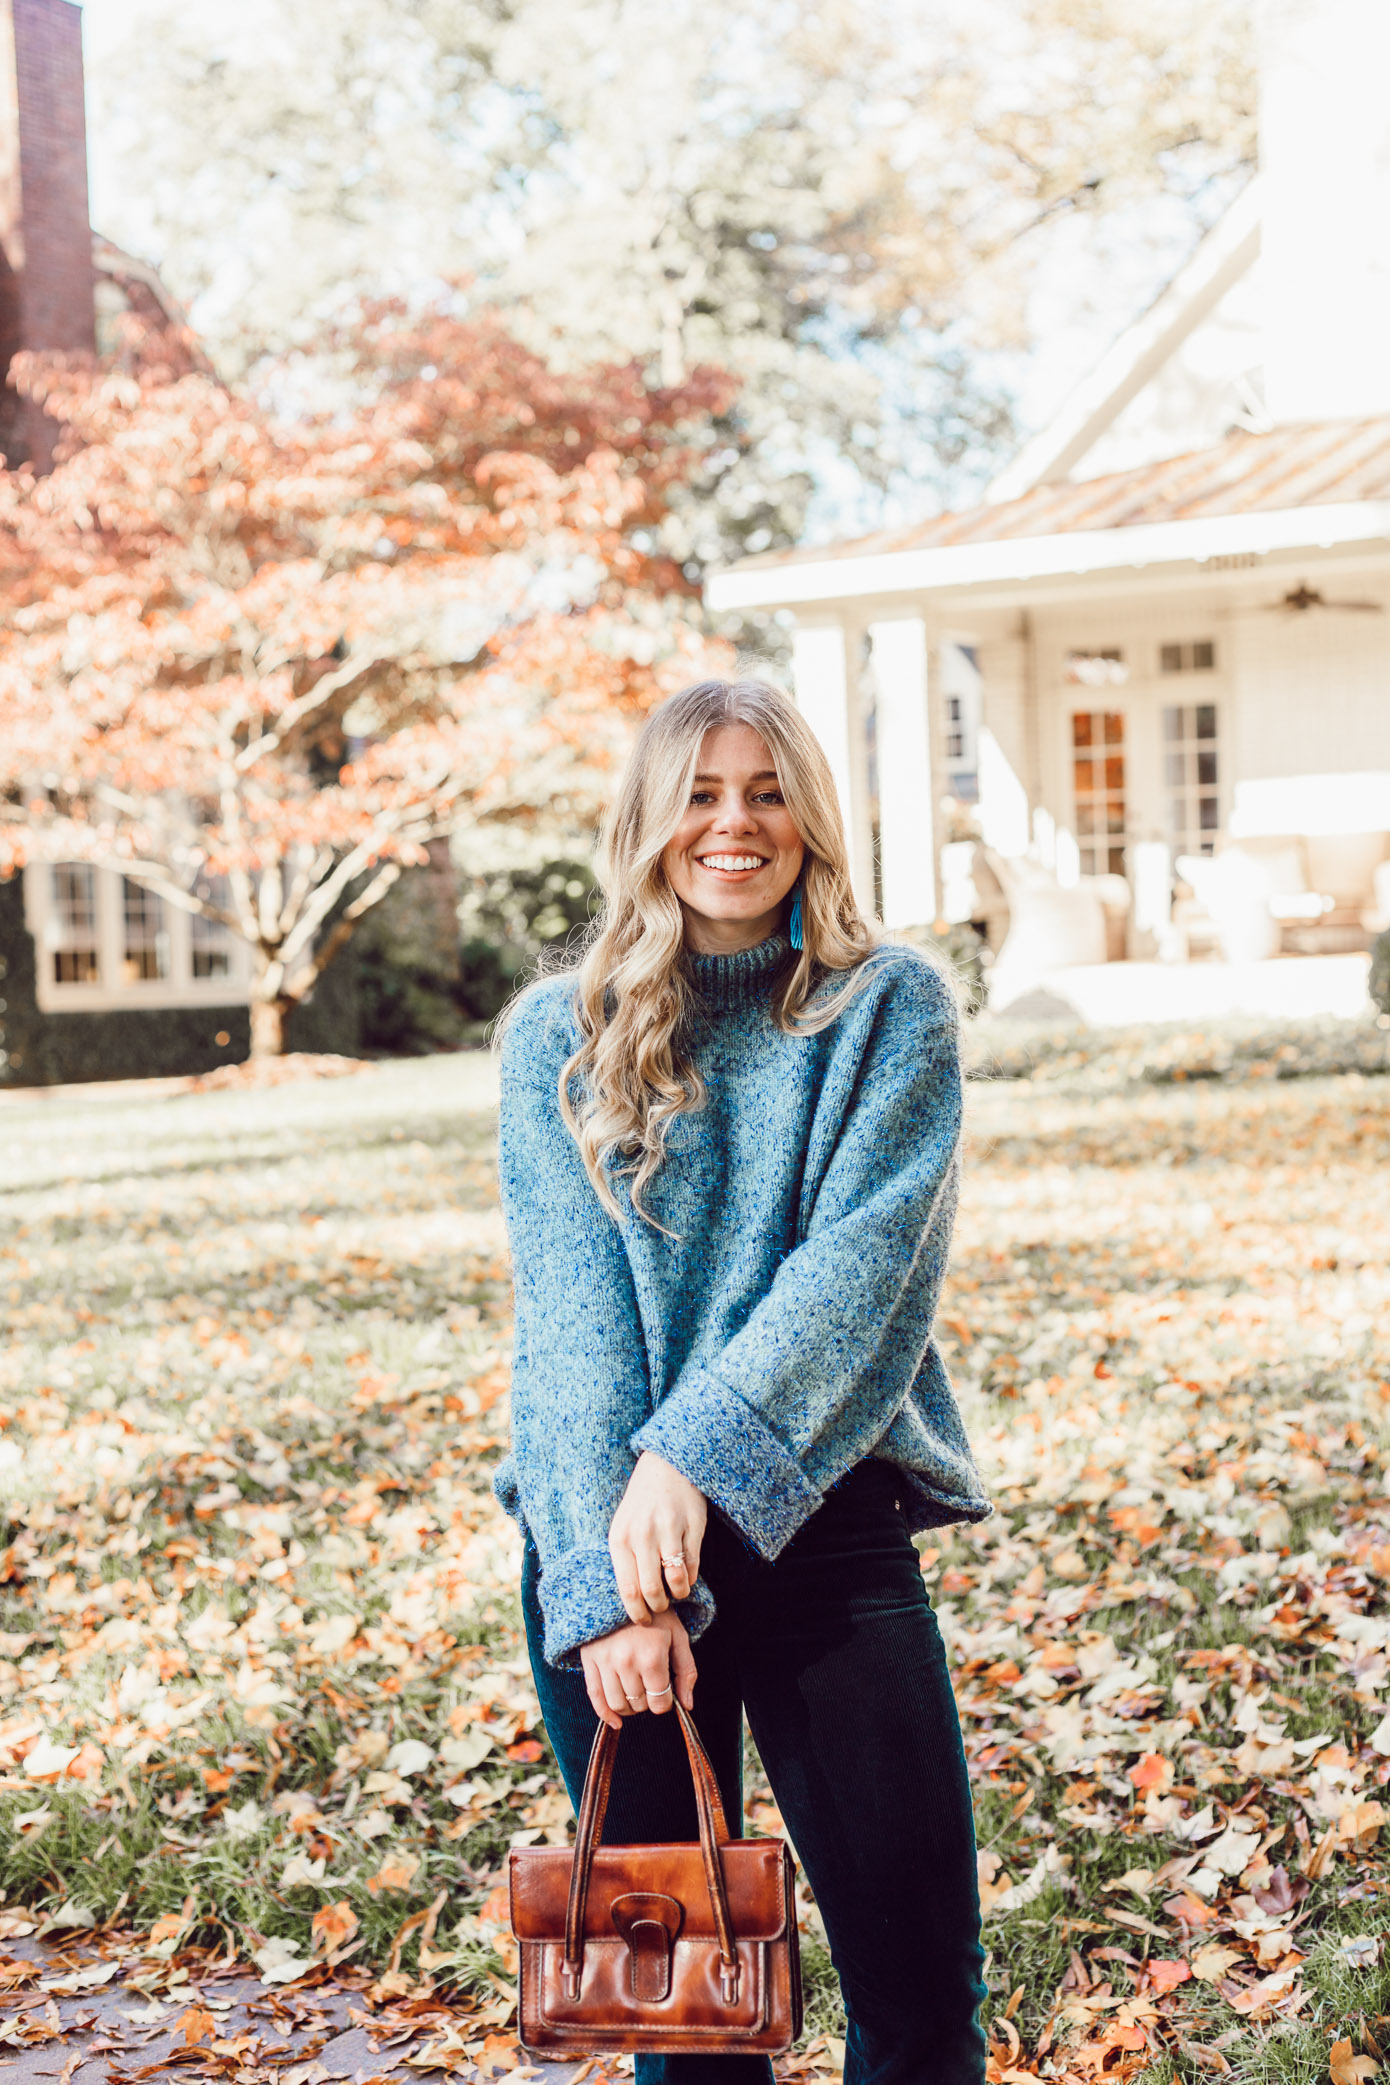 Anthropologie Sparkle Knit Turtleneck Sweater, Styling Corduroys for Winter | Must Try Winter Trend featured on Louella Reese Life & Style Blog